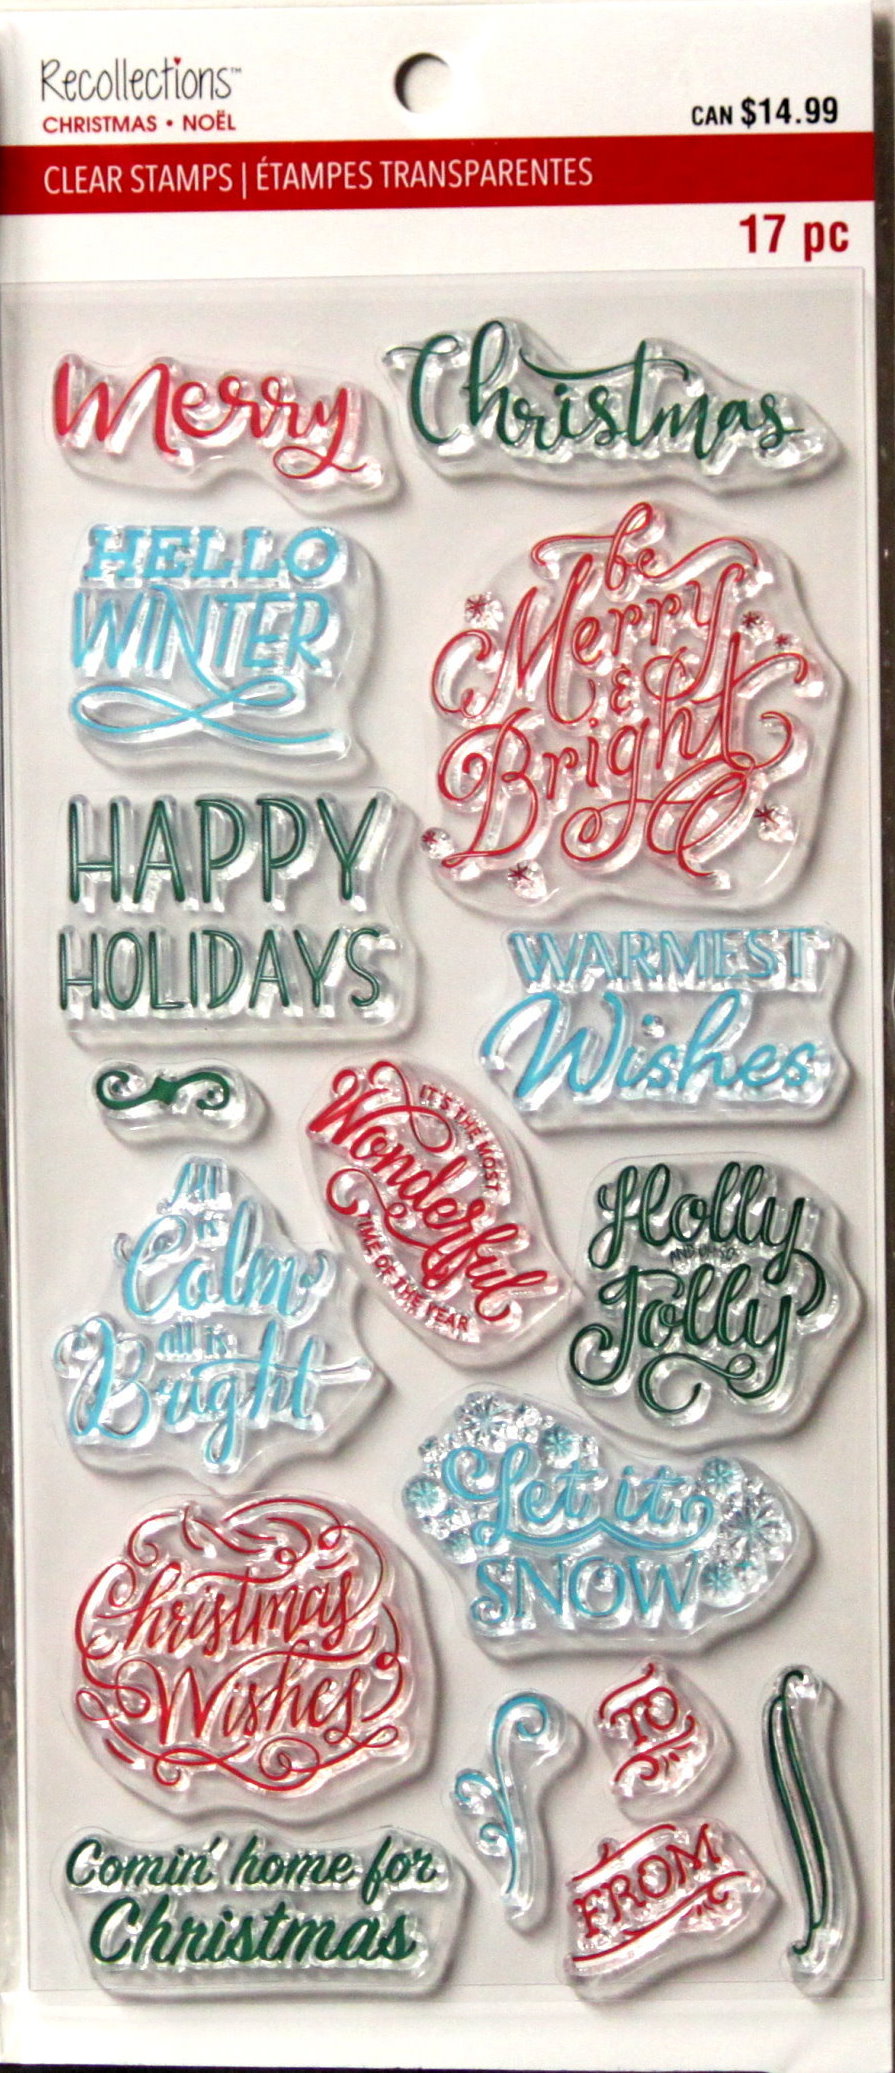 Recollections Christmas Noel Holiday Sentiments Clear Stamps Collection